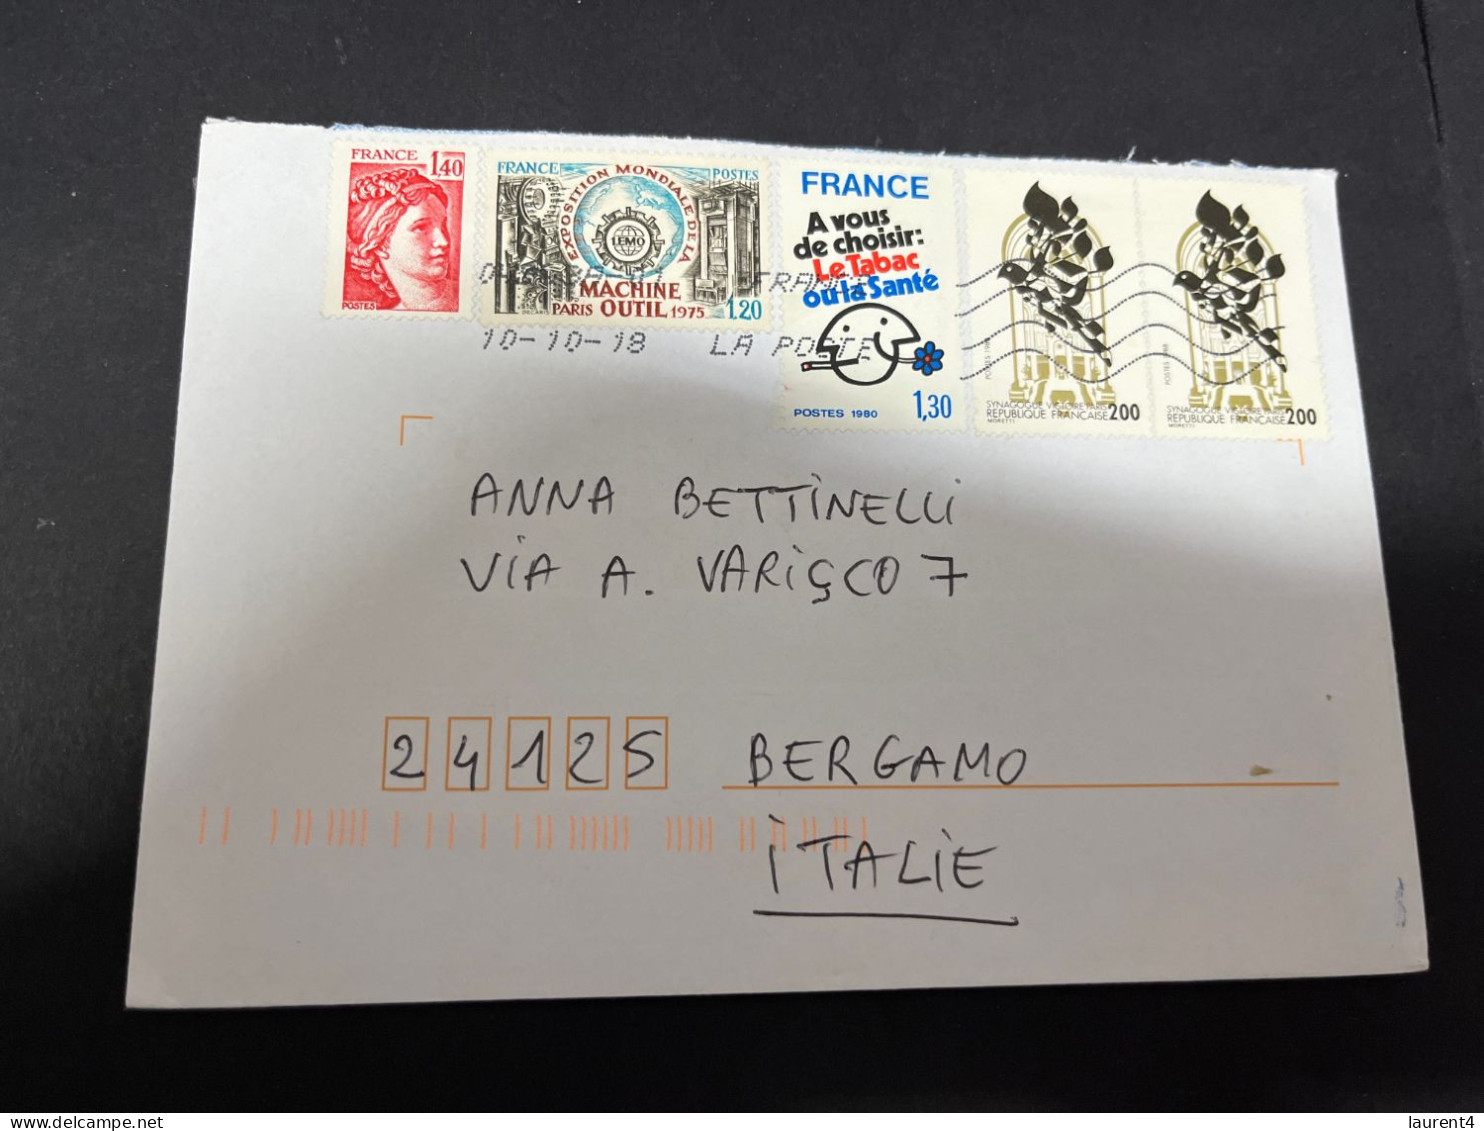 25-3-2024 (4 Y 4) 2 Letter Posted From France To Italy (with Many Stamps - 1 No Postmark) - Covers & Documents